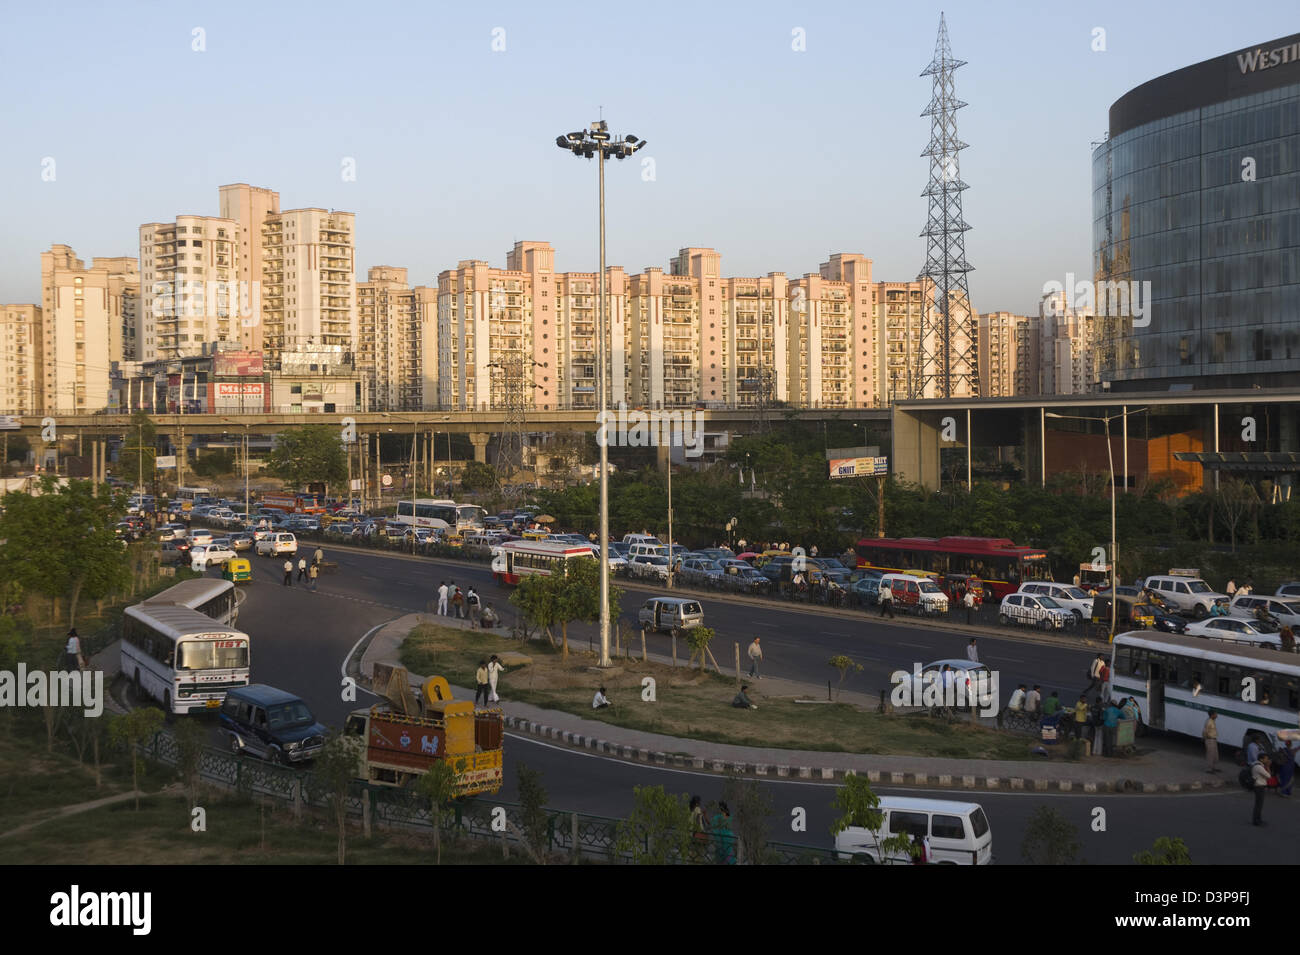 Traffic jam on the road with multistoried residential apartments in the background, IFFCO Chowk, Gurgaon, Haryana Stock Photo